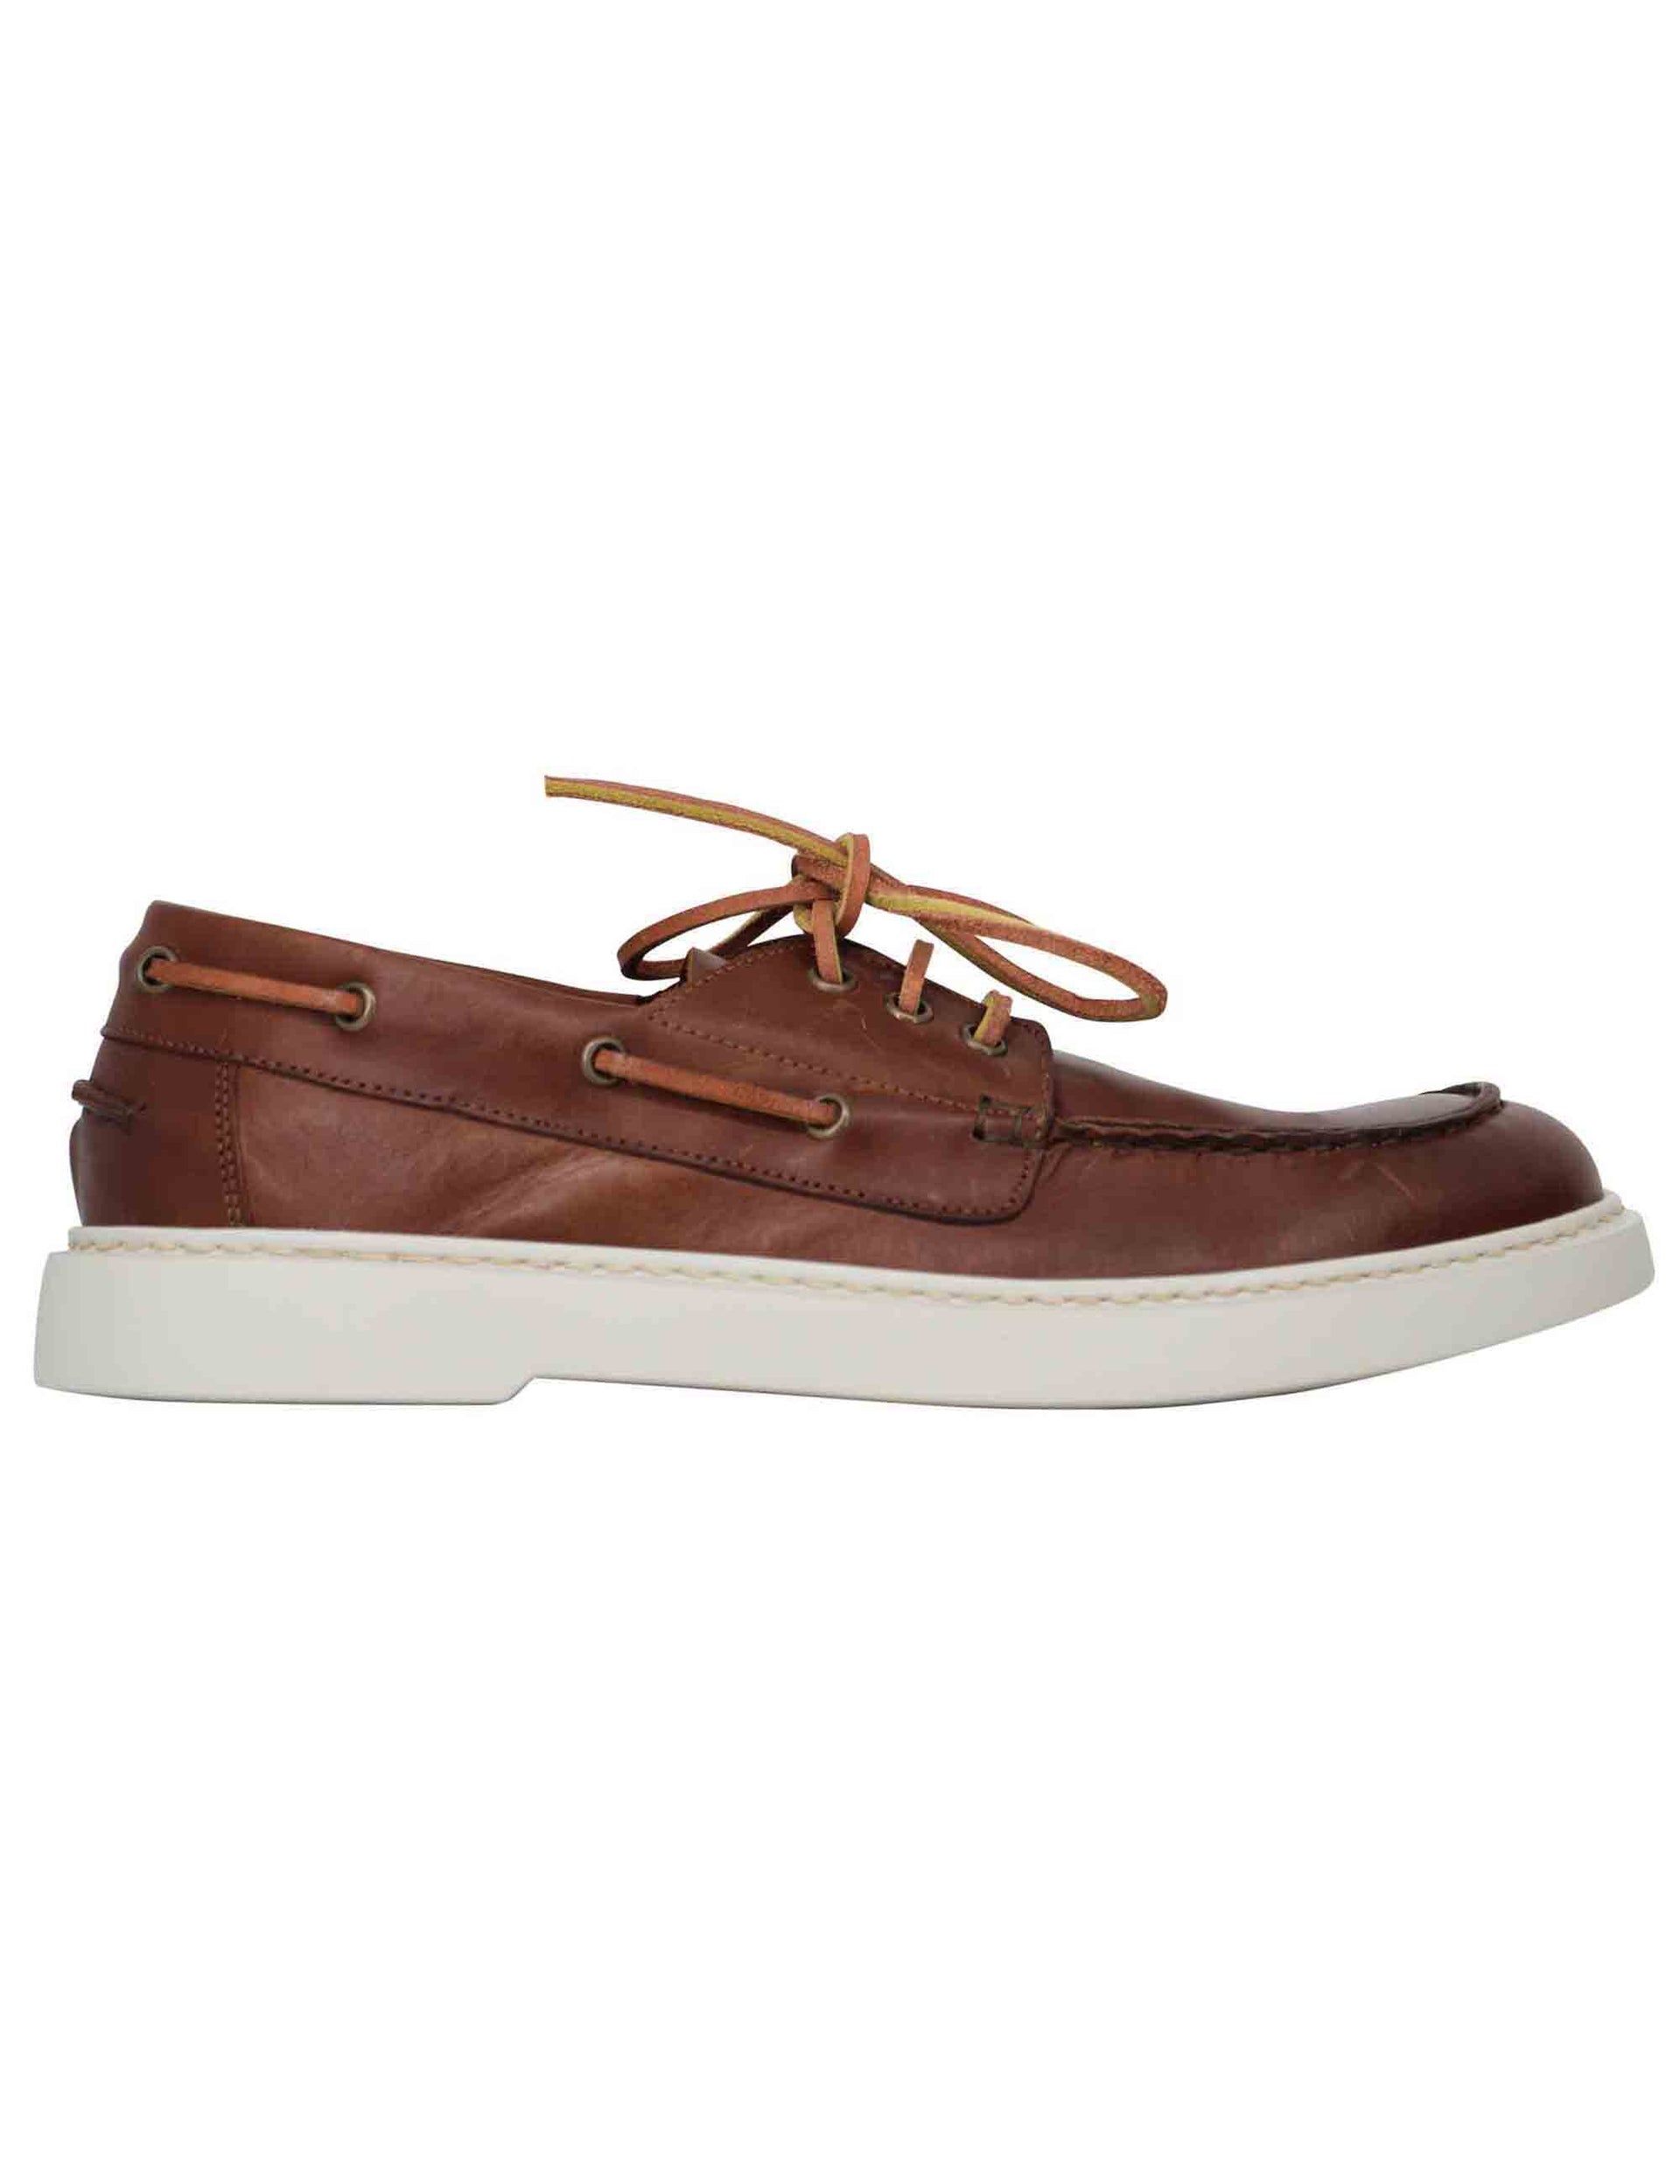 Men's lace-ups in tan leather with leather laces